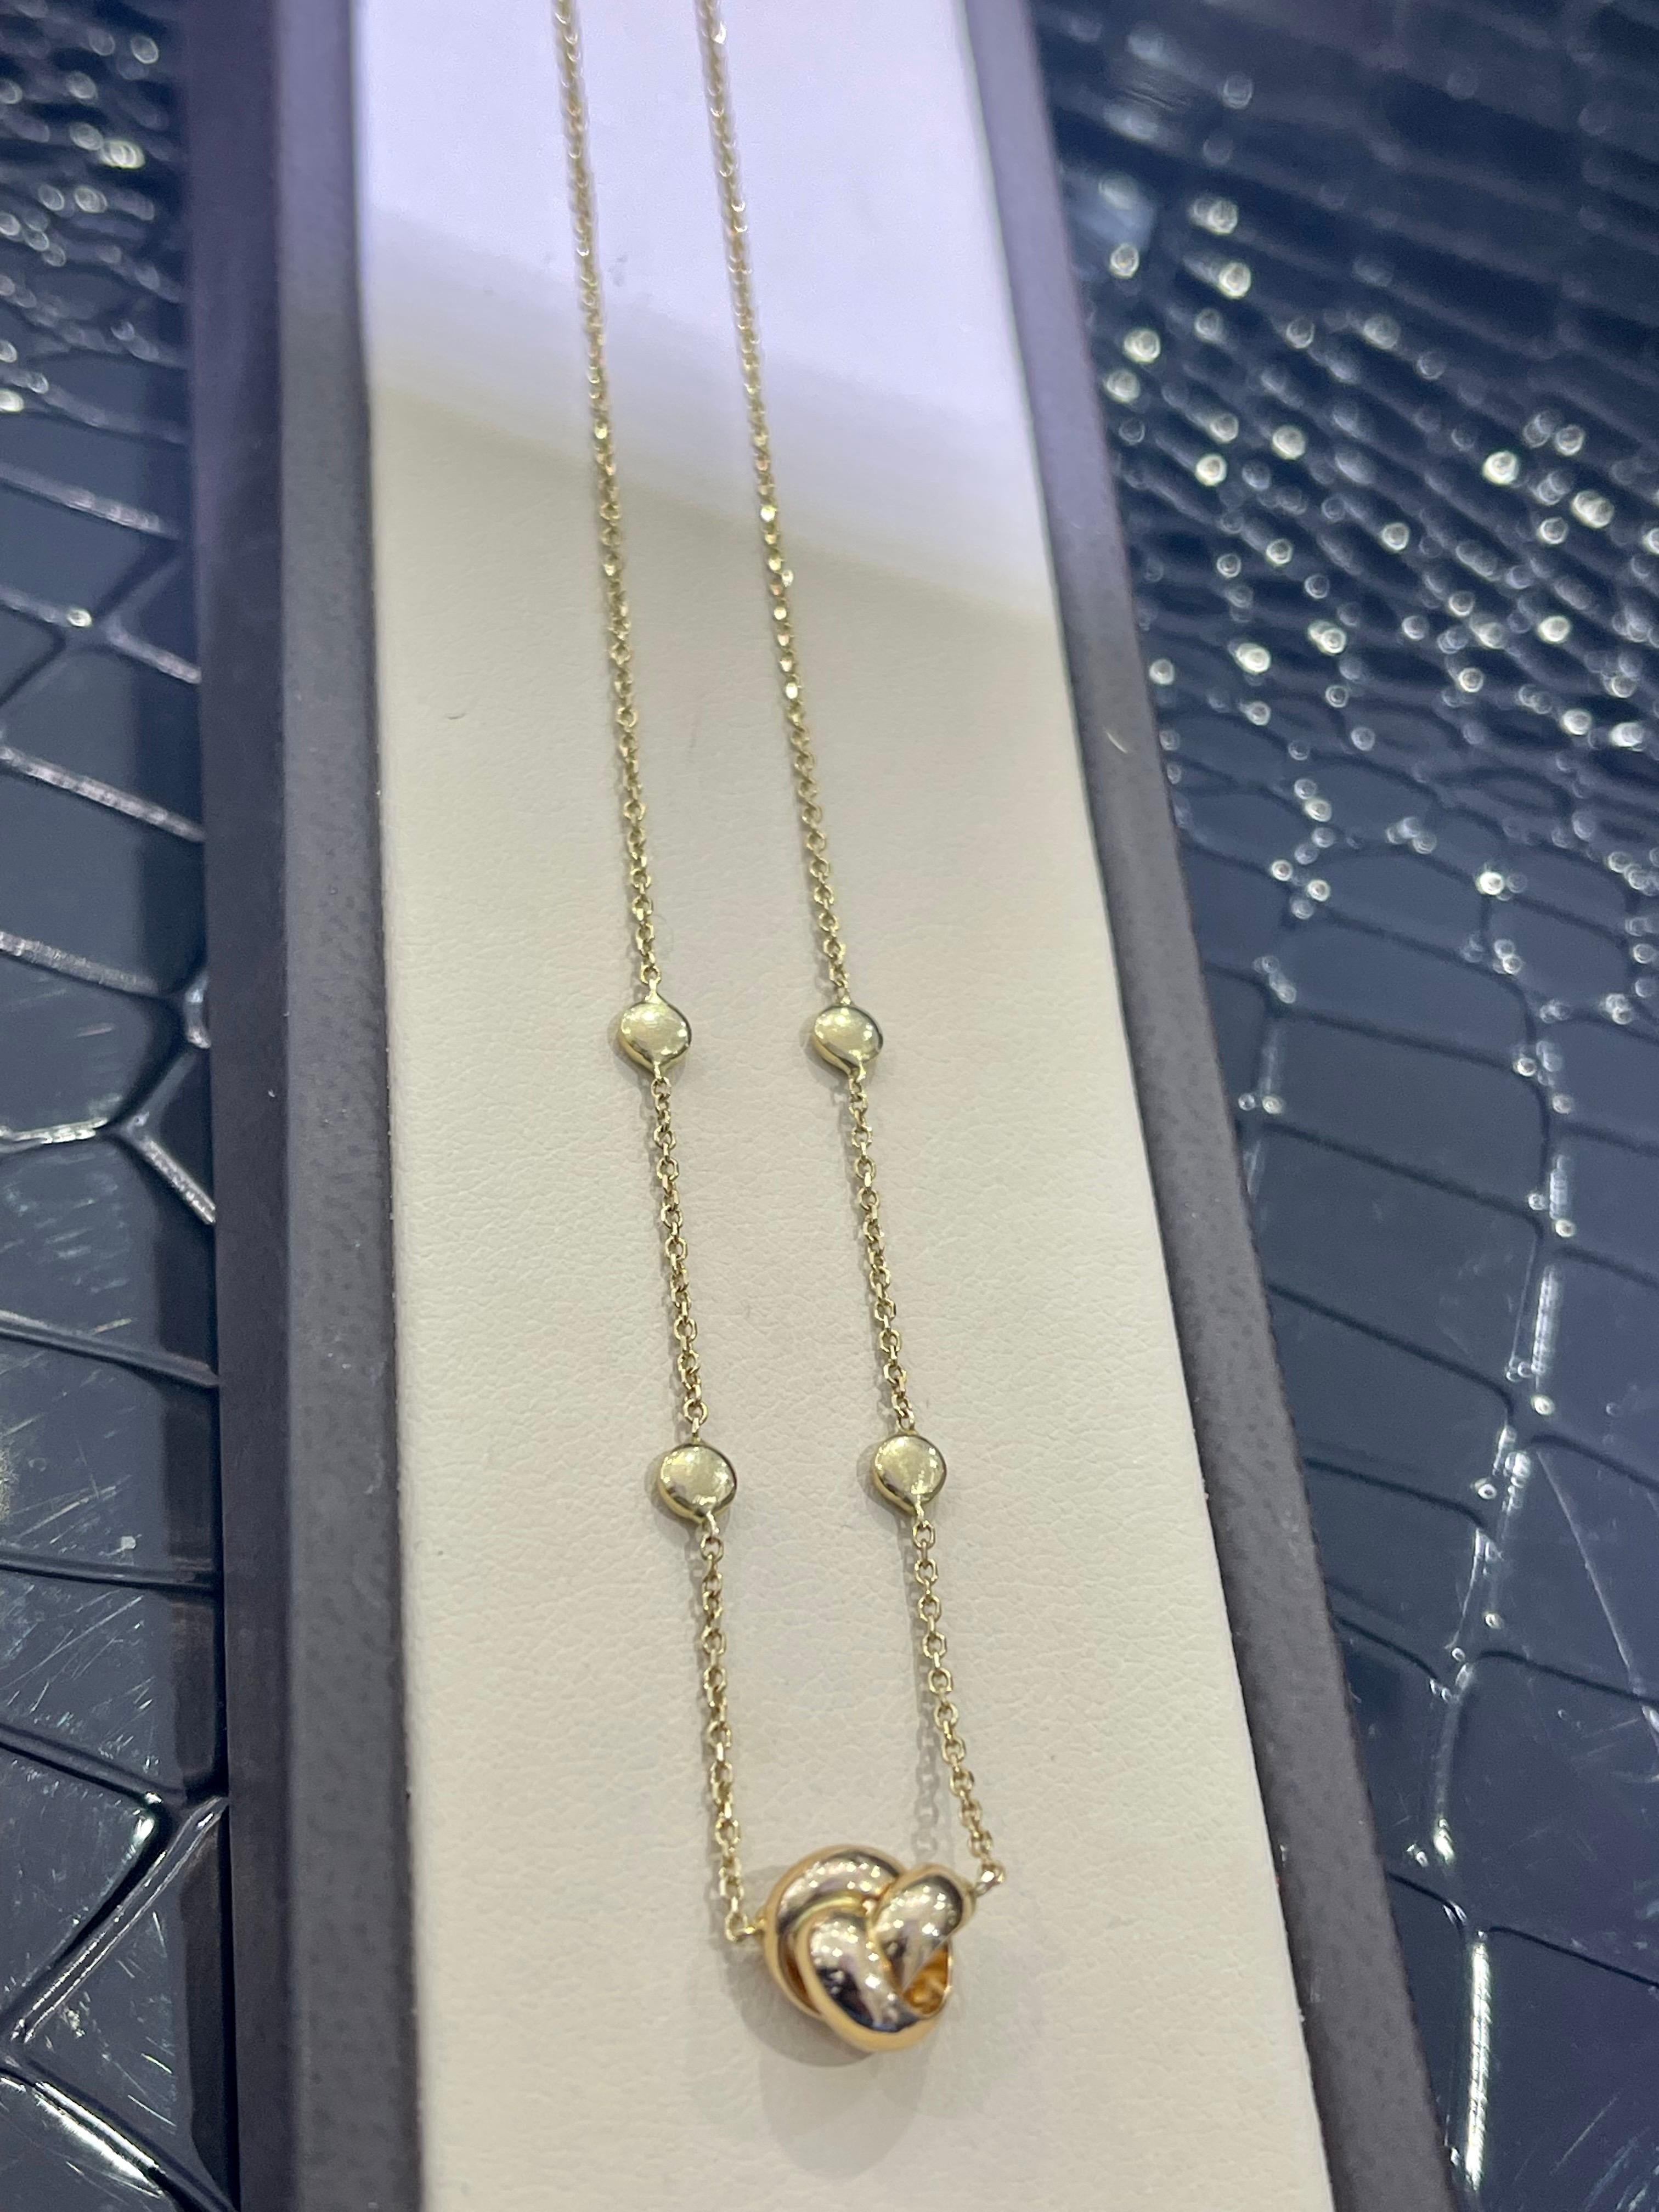 14k Yellow Gold Knot Necklace .

Length is 16”

Weight is 3 grams.

Diameter of the knot is approximately 5/16”